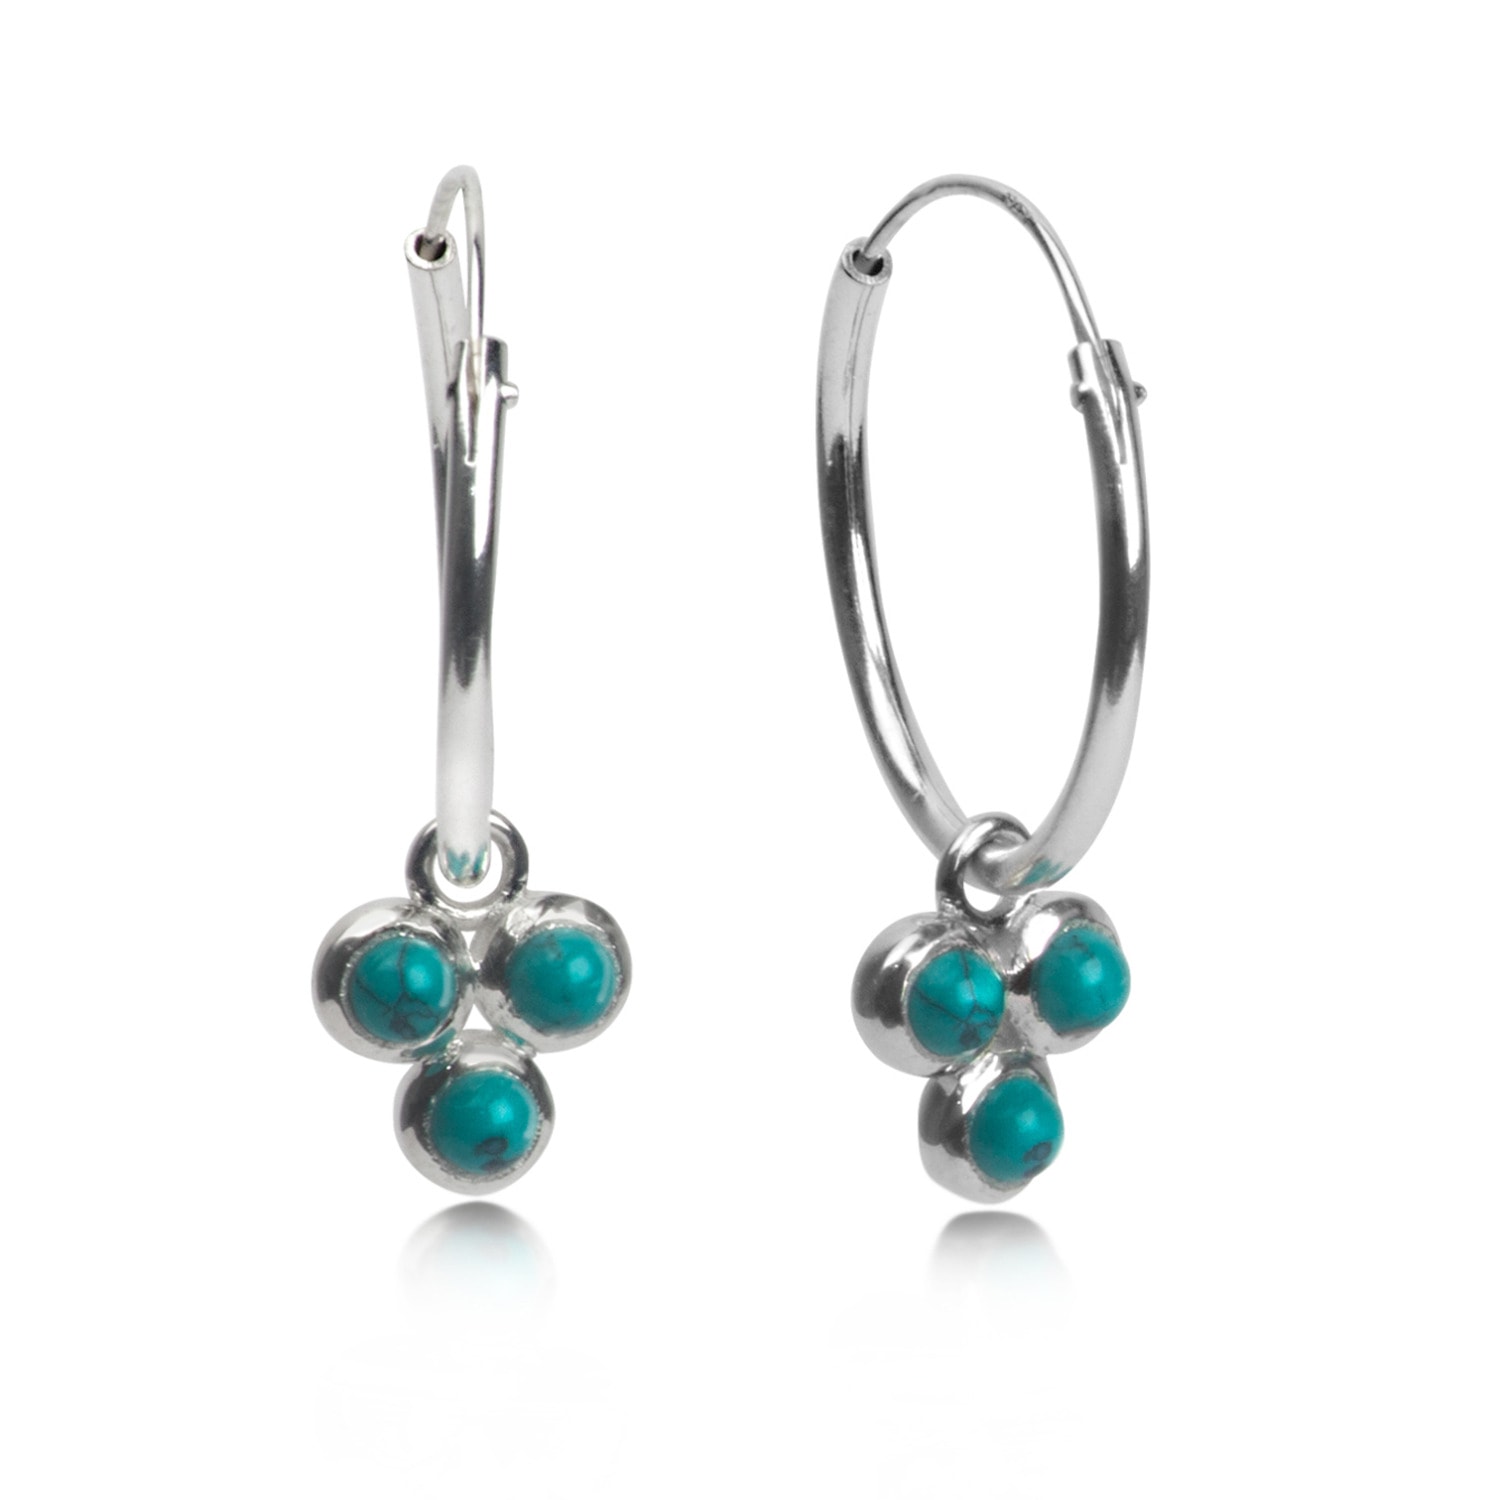 Women’s Silver / Blue Hoop Earrings With Turquoise Trilogy Charm In Sterling Silver The Jewellery Store London